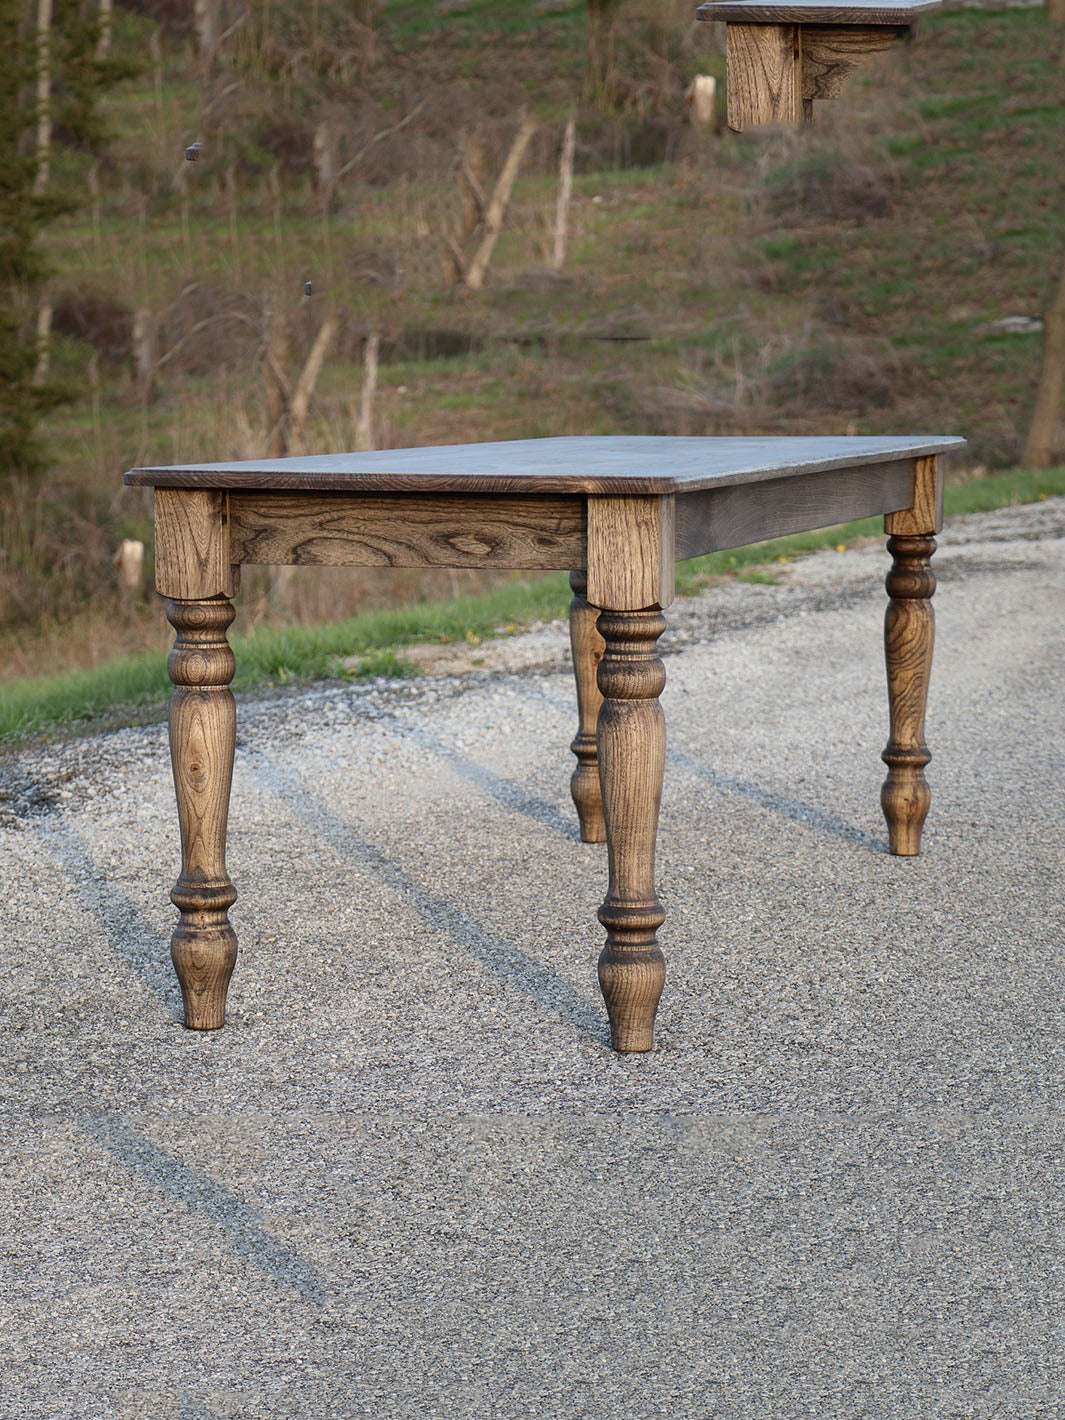 Classic Hackberry Hardwood Farmhouse Dining Table Earthly Comfort Dining Tables 1598-5